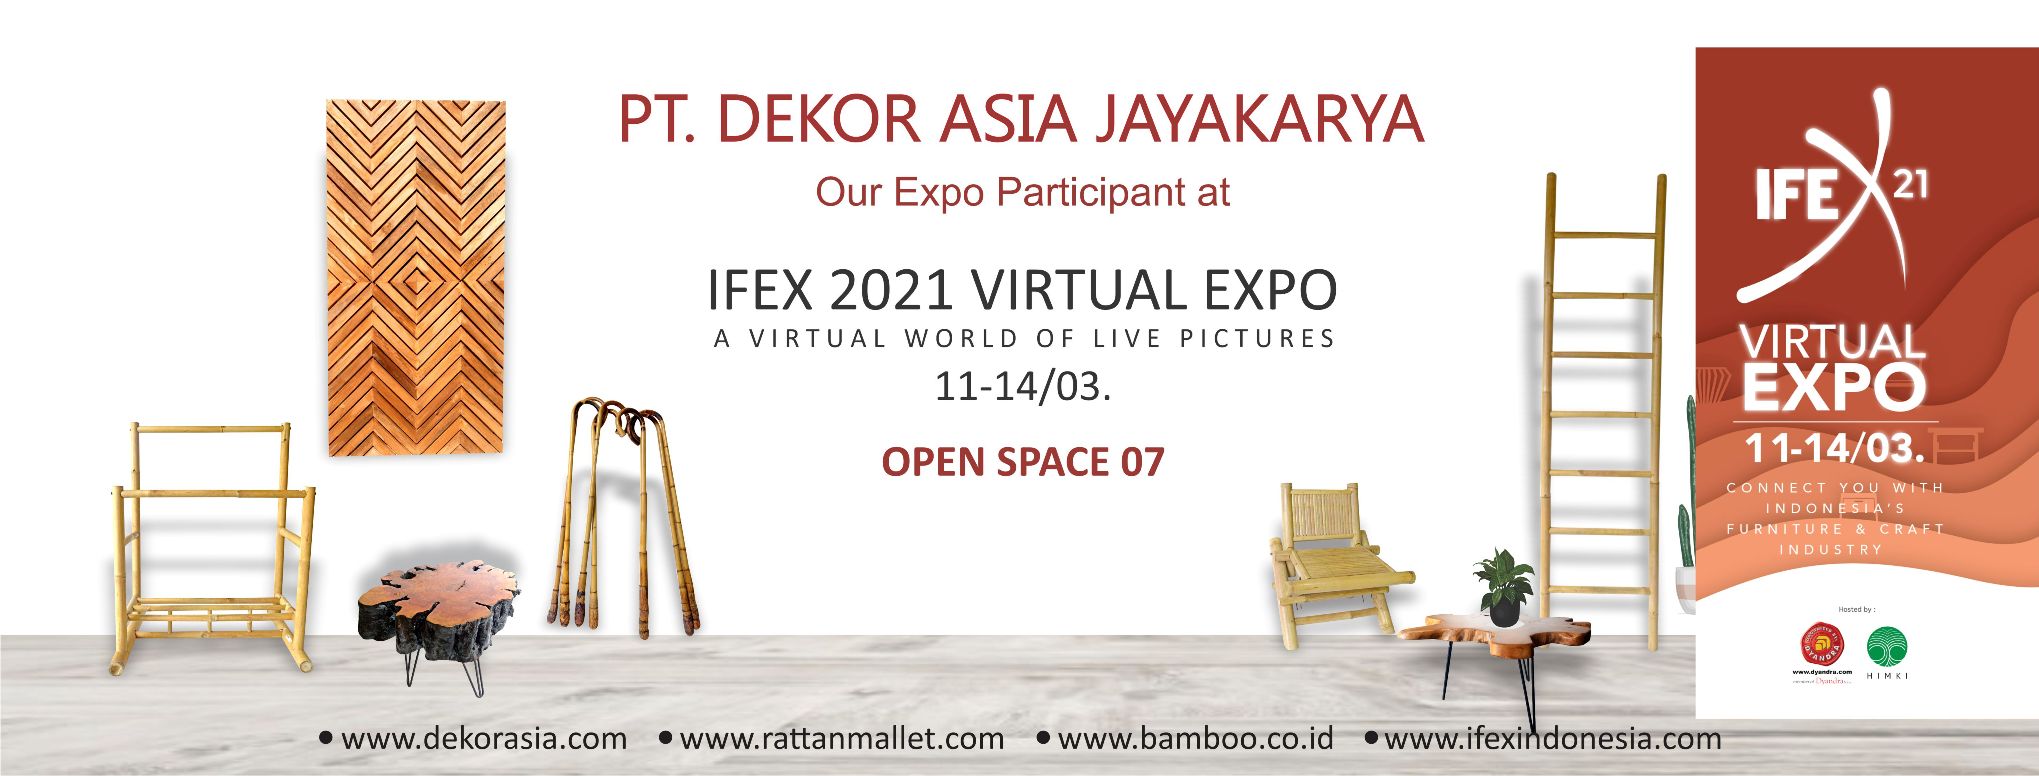 Our Expo Participant at IFEX 2021 Virtual Expo 11-14/03 - OPEN SPACE 07